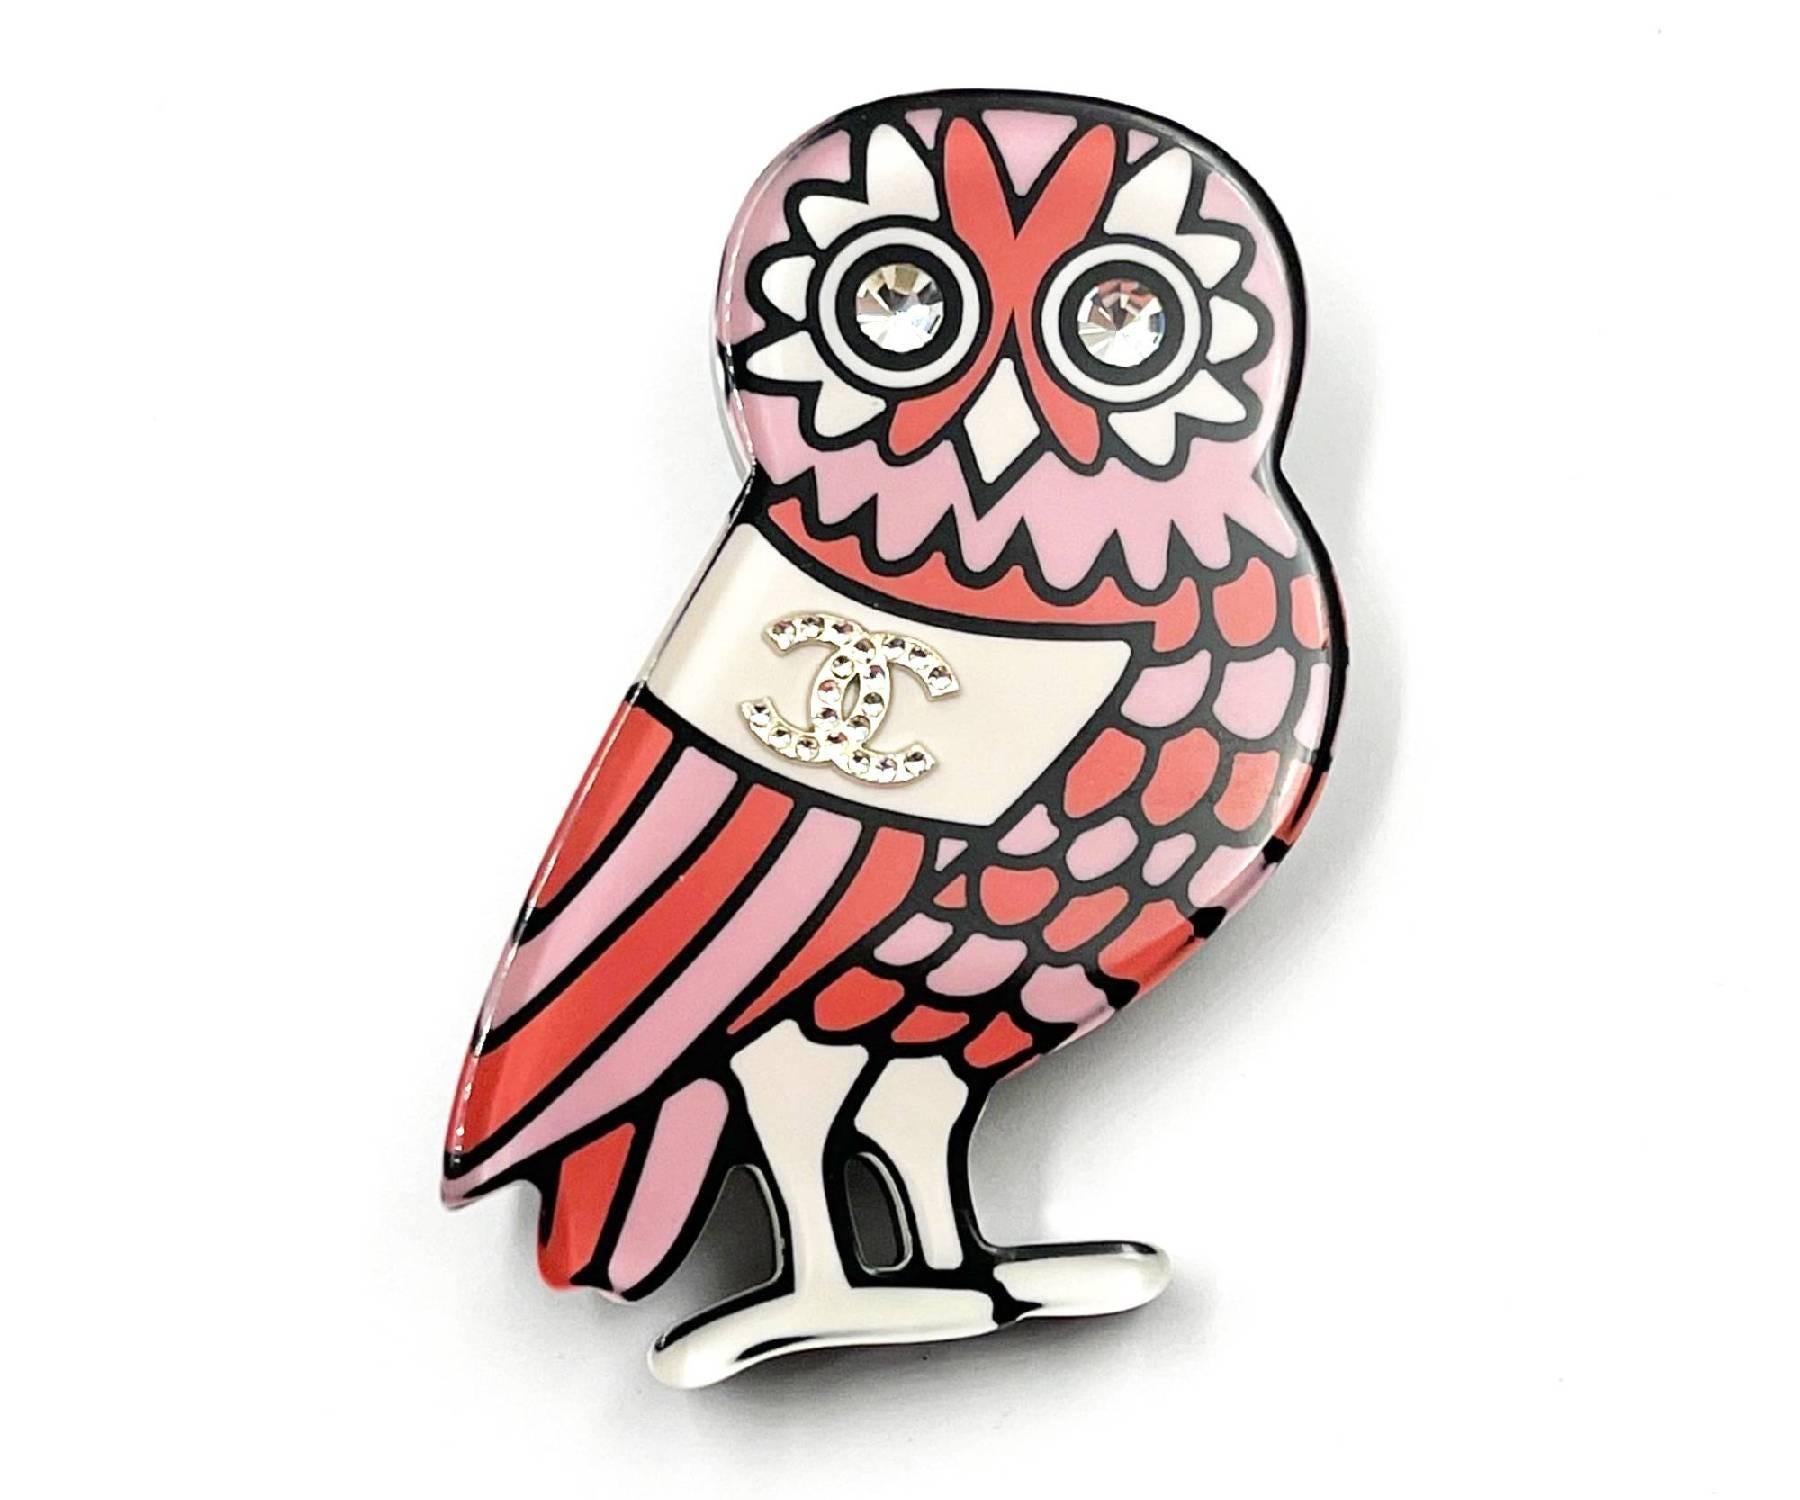 Chanel Pink Owl Resin Brooch

*Marked 18
*Comes with original box and pouch

-Approximately 1.5″ x 2.25″
-Very chic and cute
-Great with white tee or denim jacket
-In a very great condition. There are some light stains on the pin